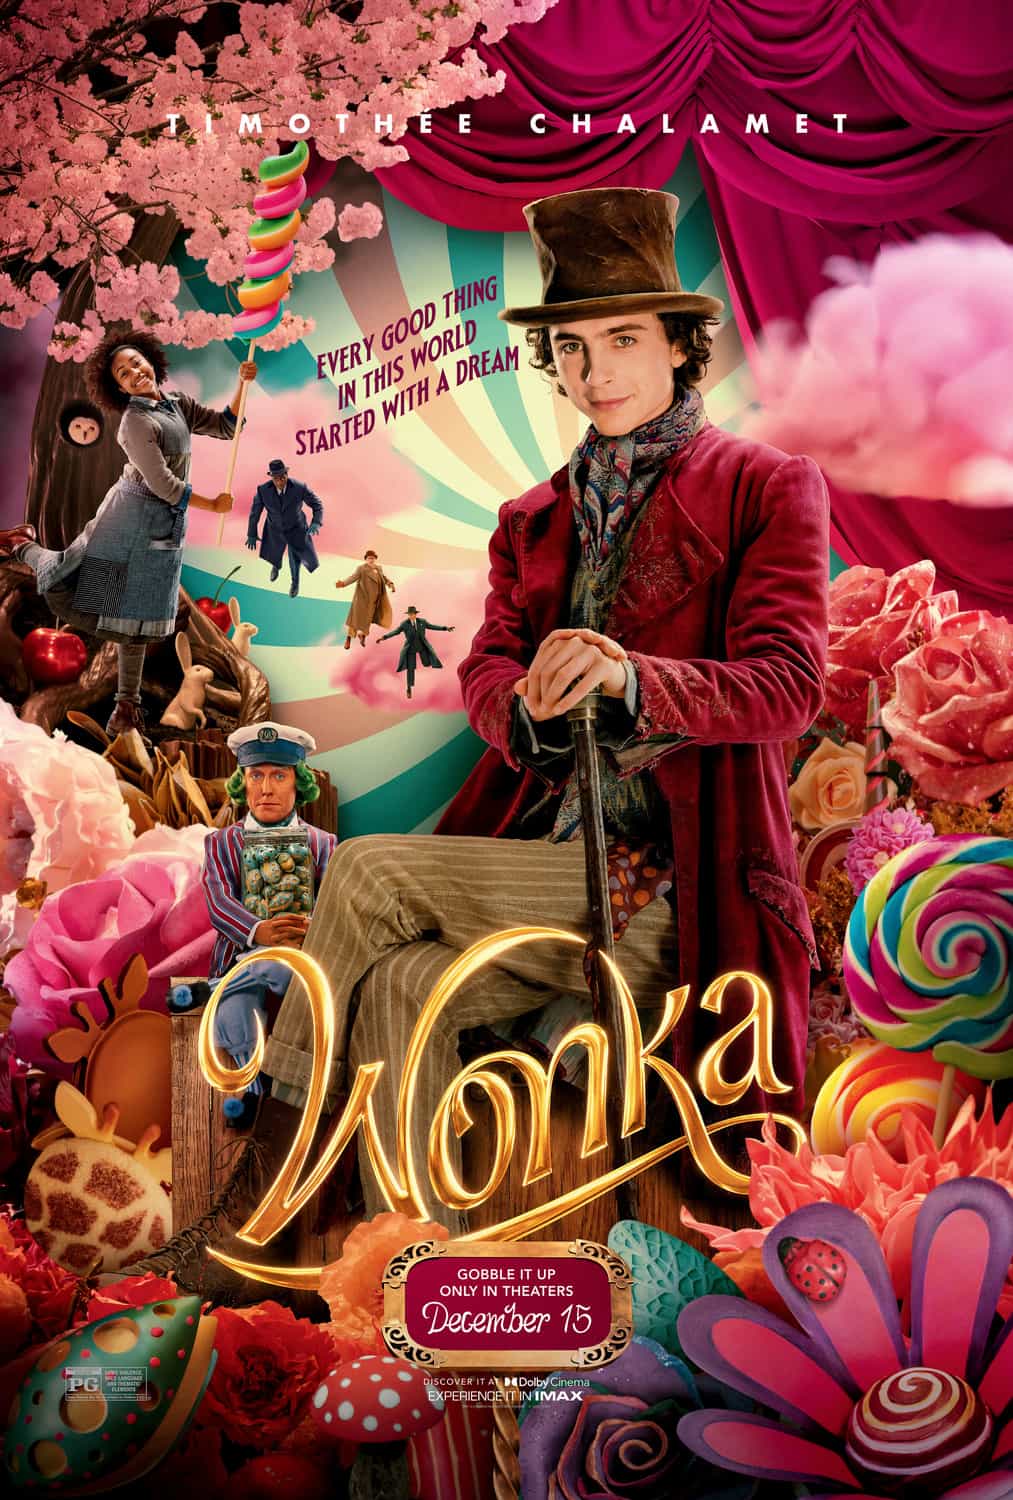 Wonka has been given a PG age rating in the UK for mild threat, violence, implied bad language